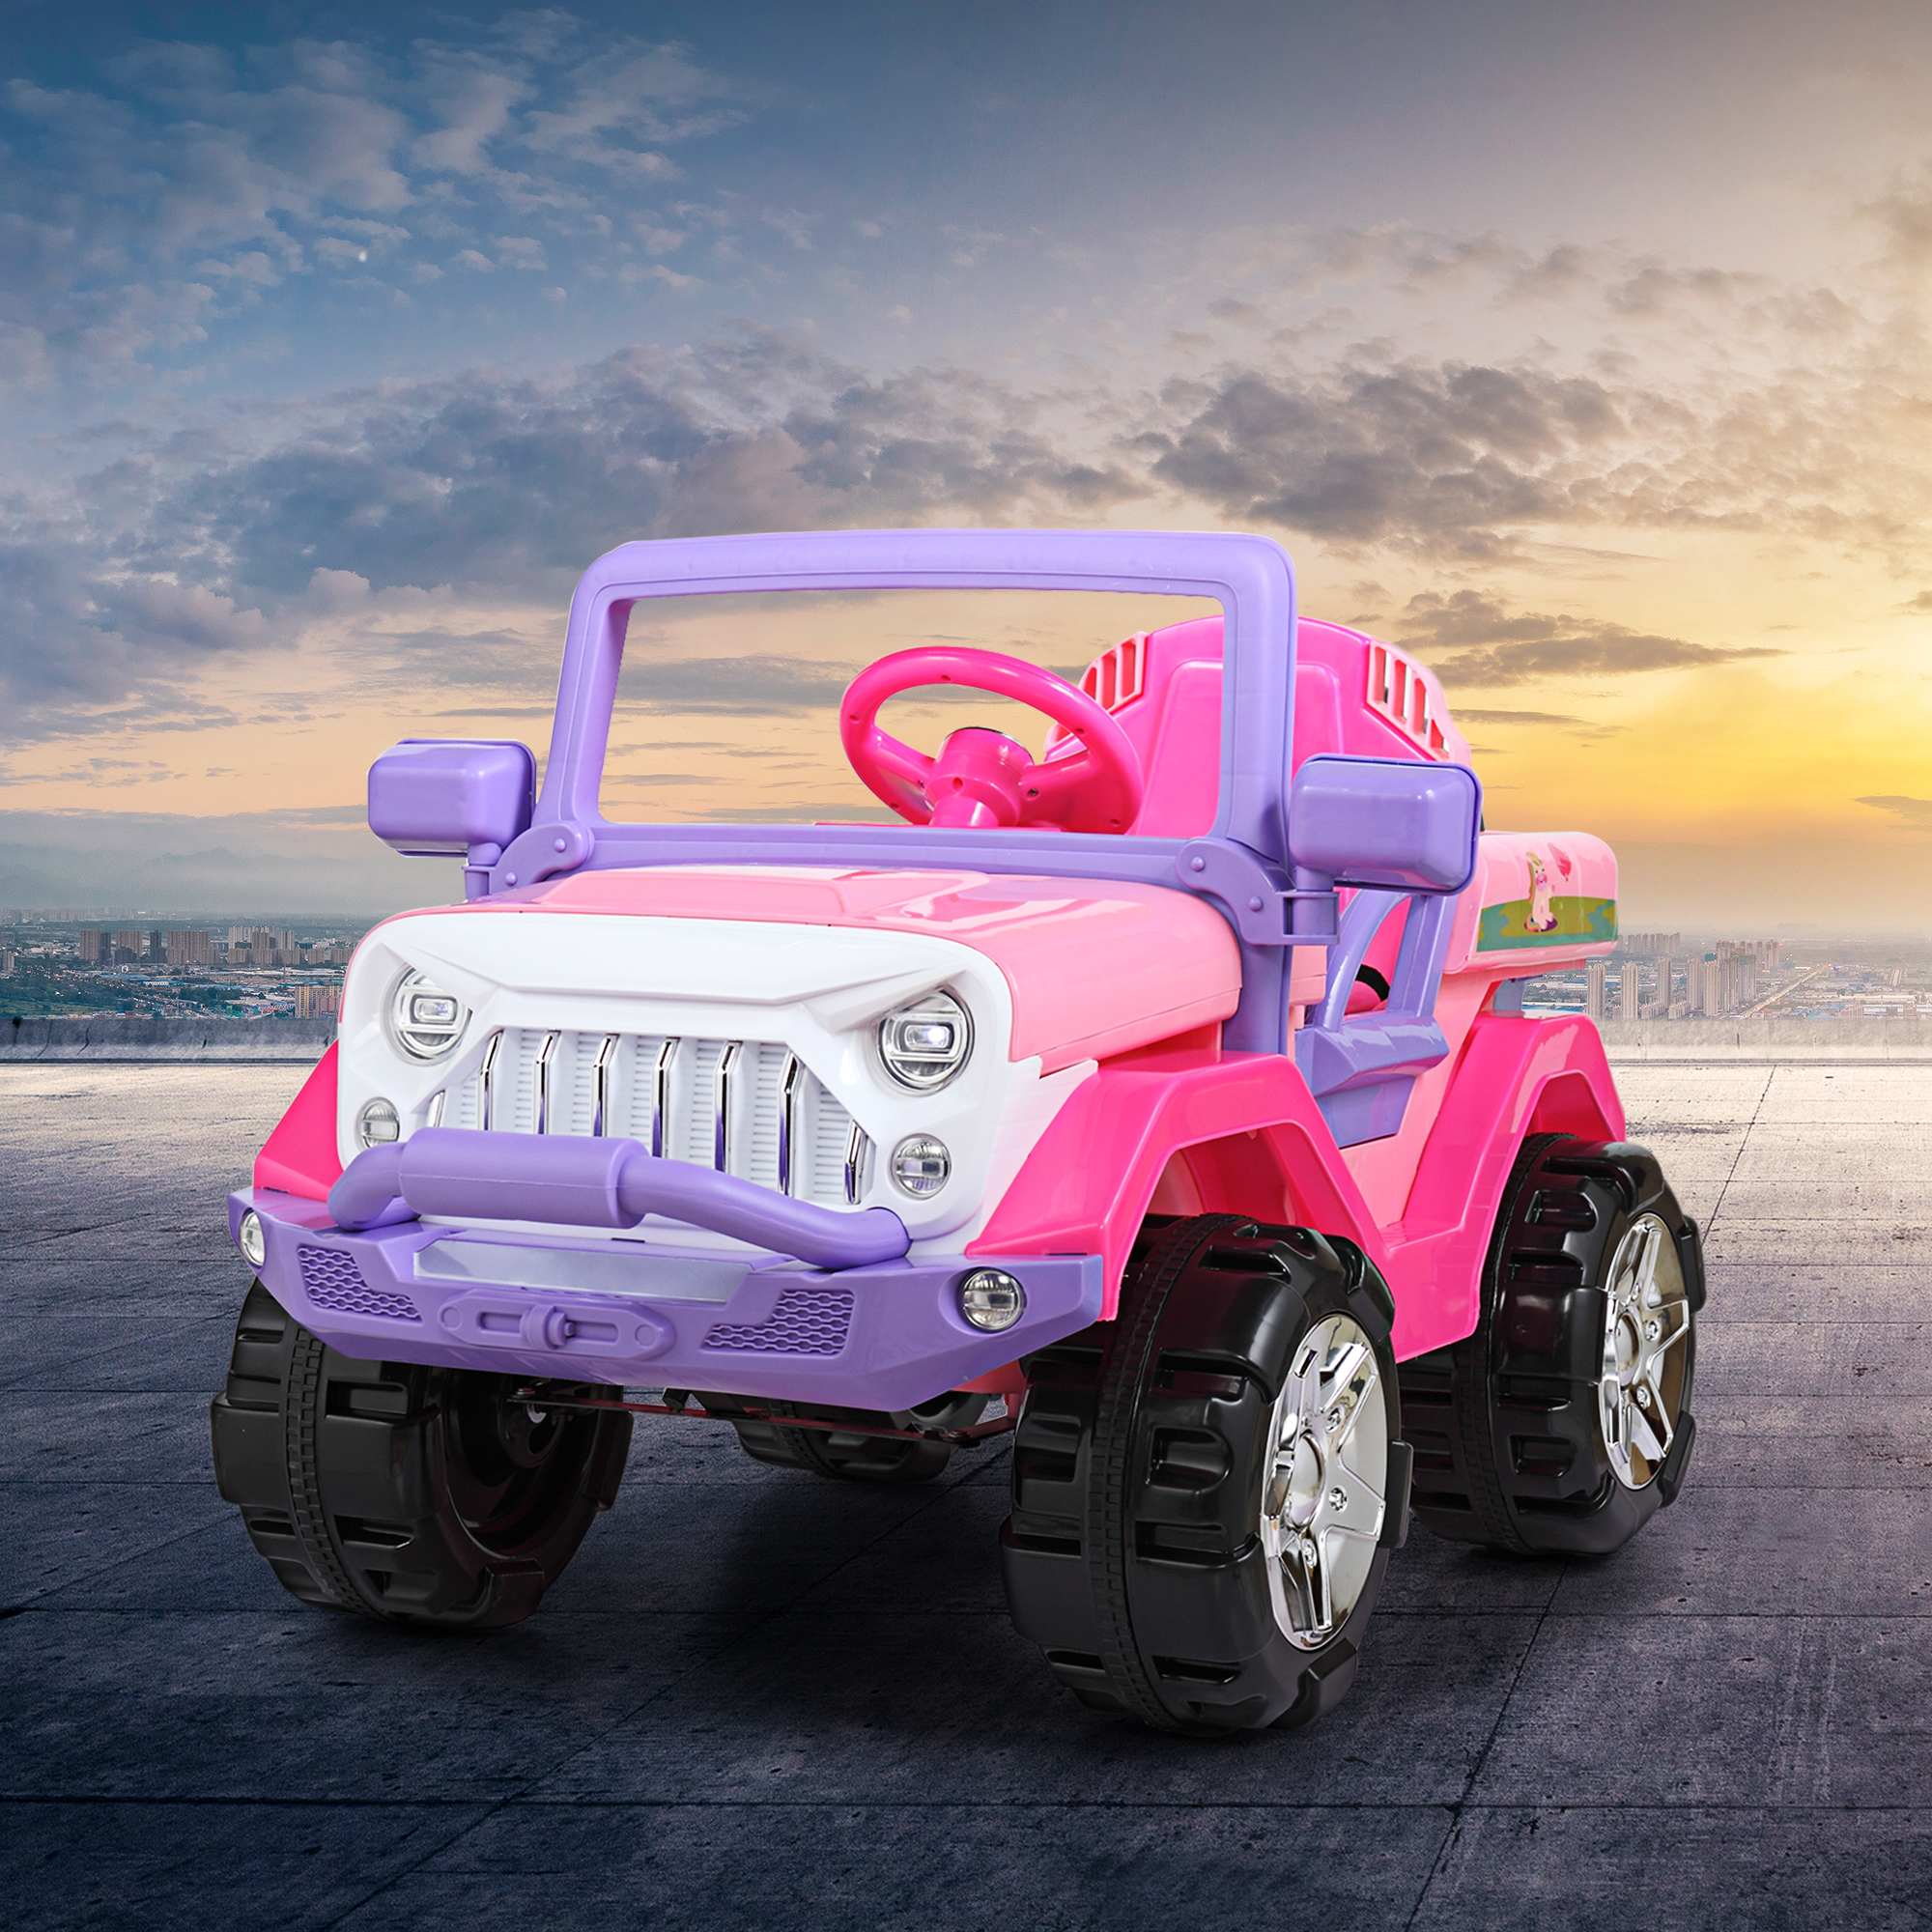 12V Electric Ride On Cars Kids Battery-Powered SUV with Remote Control W/ MP3 Player, LED Headlights,Pink+Purple-CASAINC